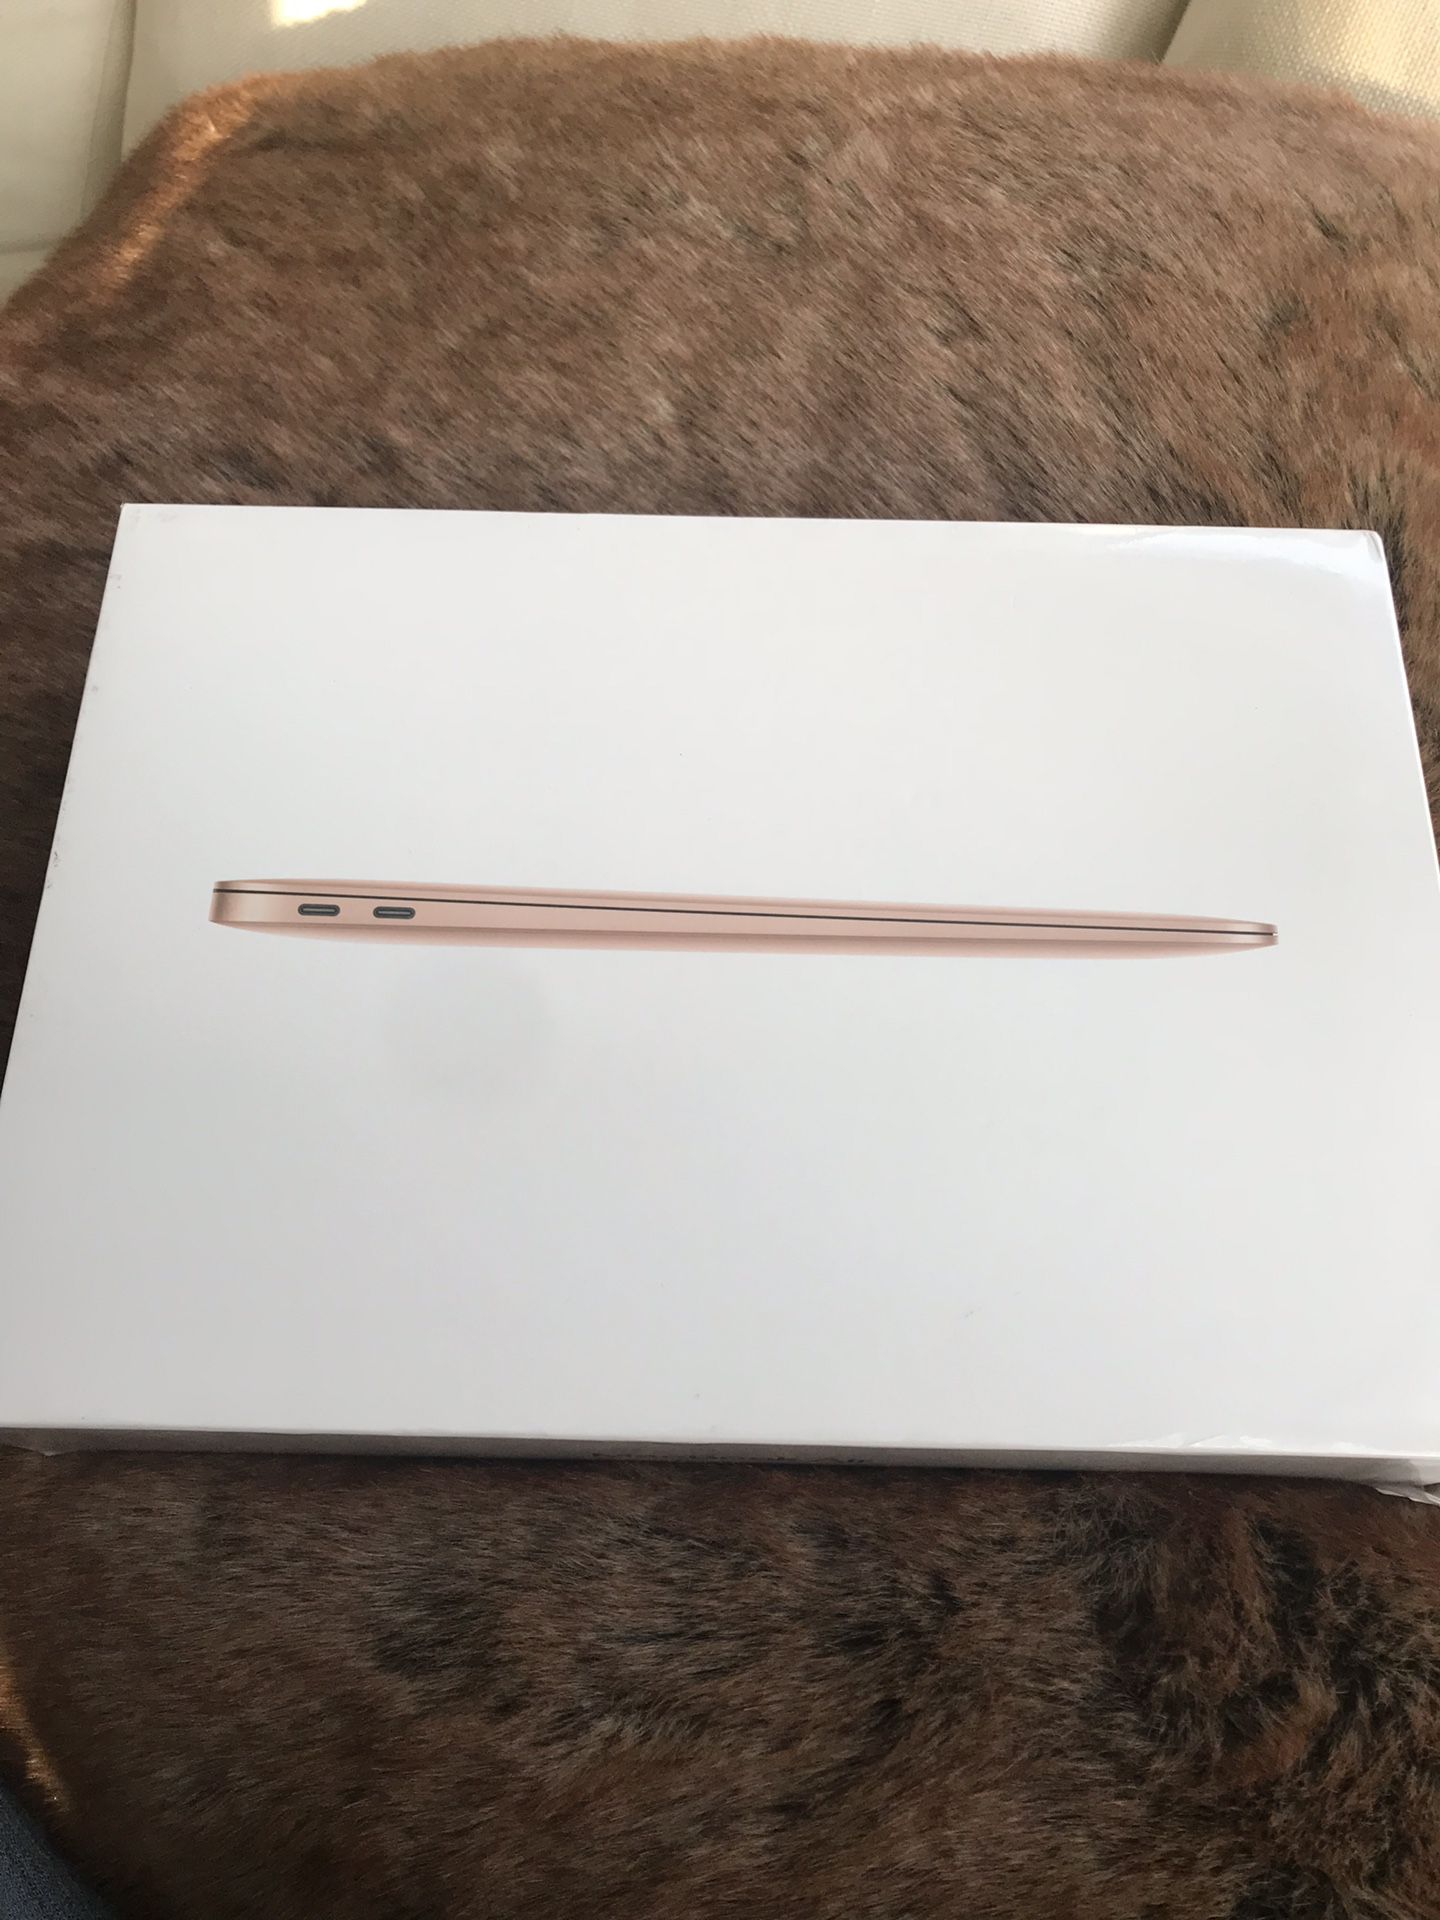 New MacBook Air Touch ID 256gb